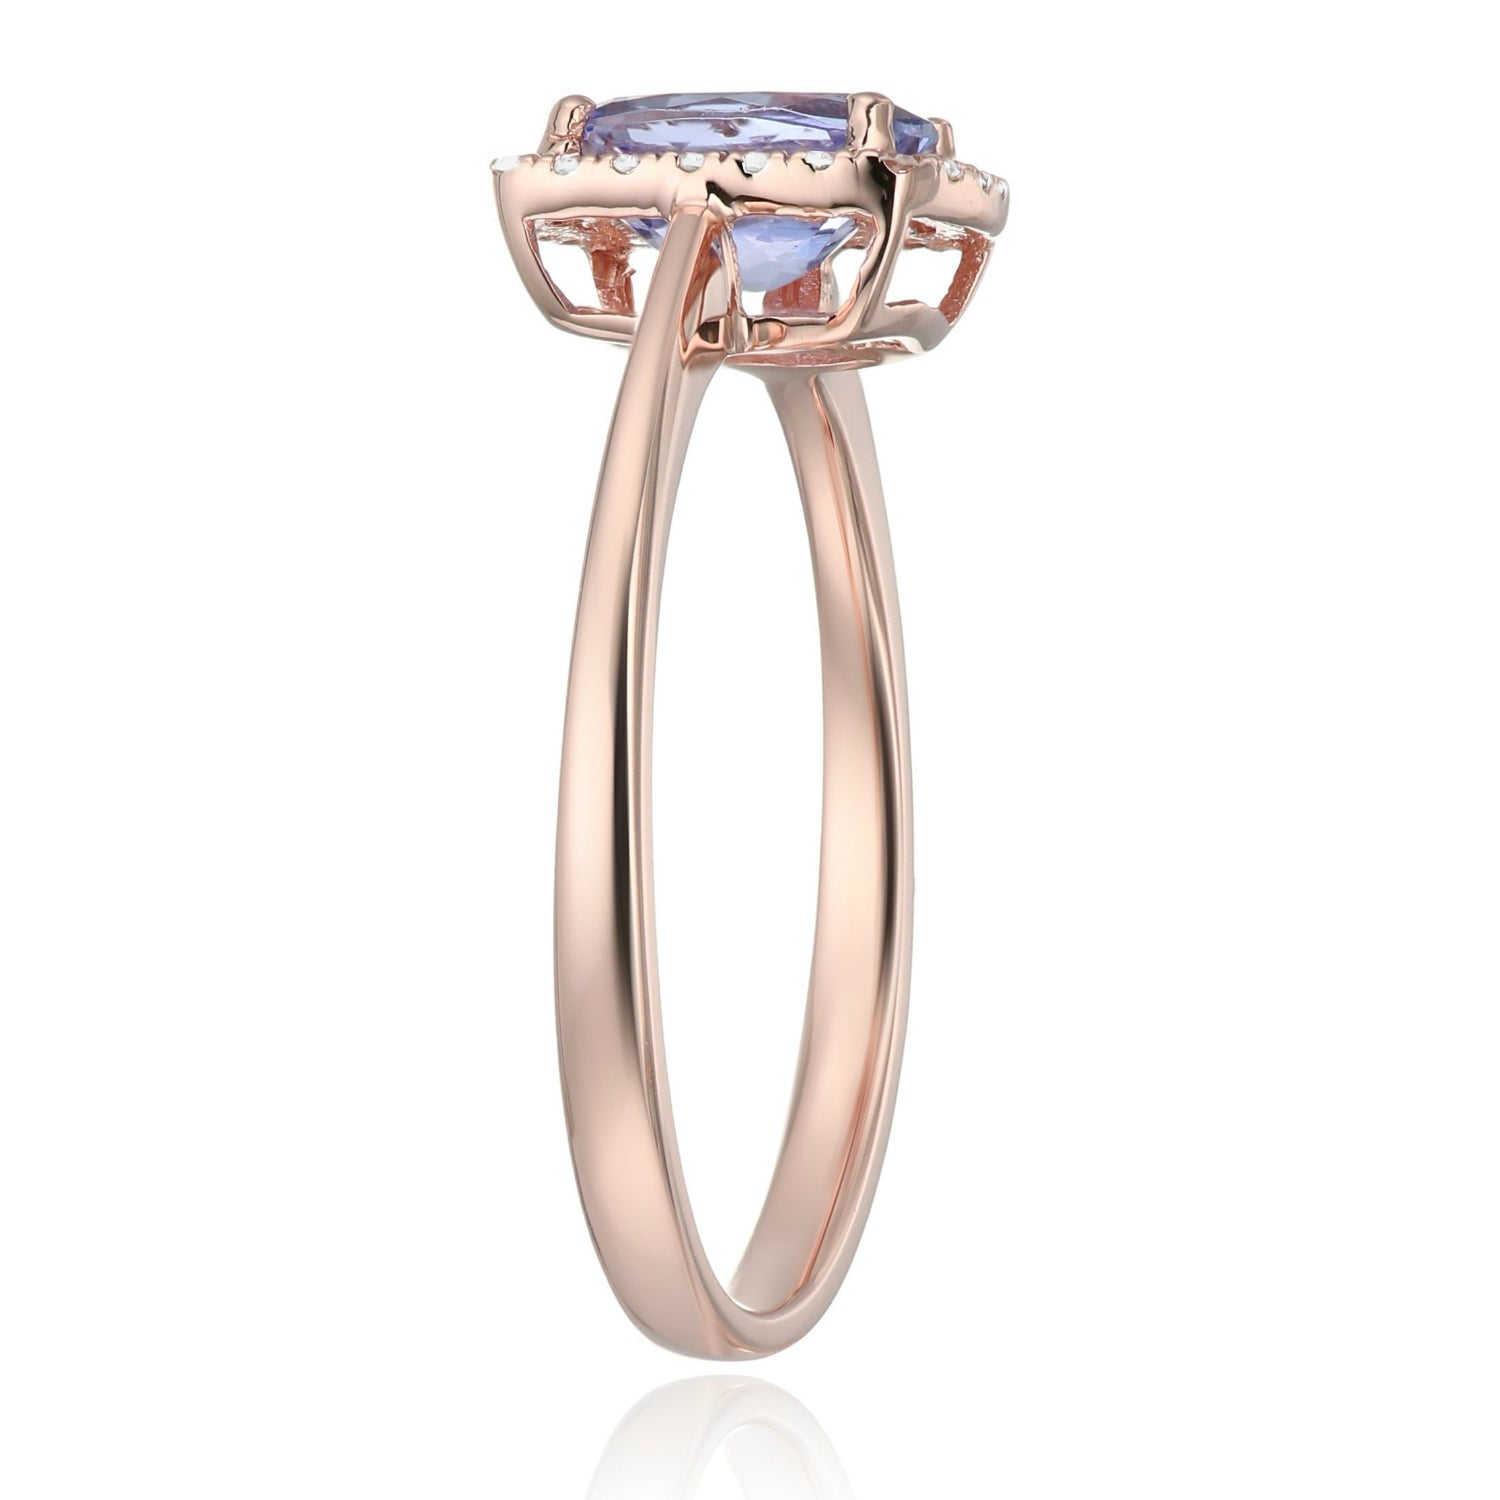 10k Rose Gold Tanzanite and Diamond Cushion Halo Engagement Ring (1/10cttw, H-I Color, I1-I2 Clarity), - pinctore